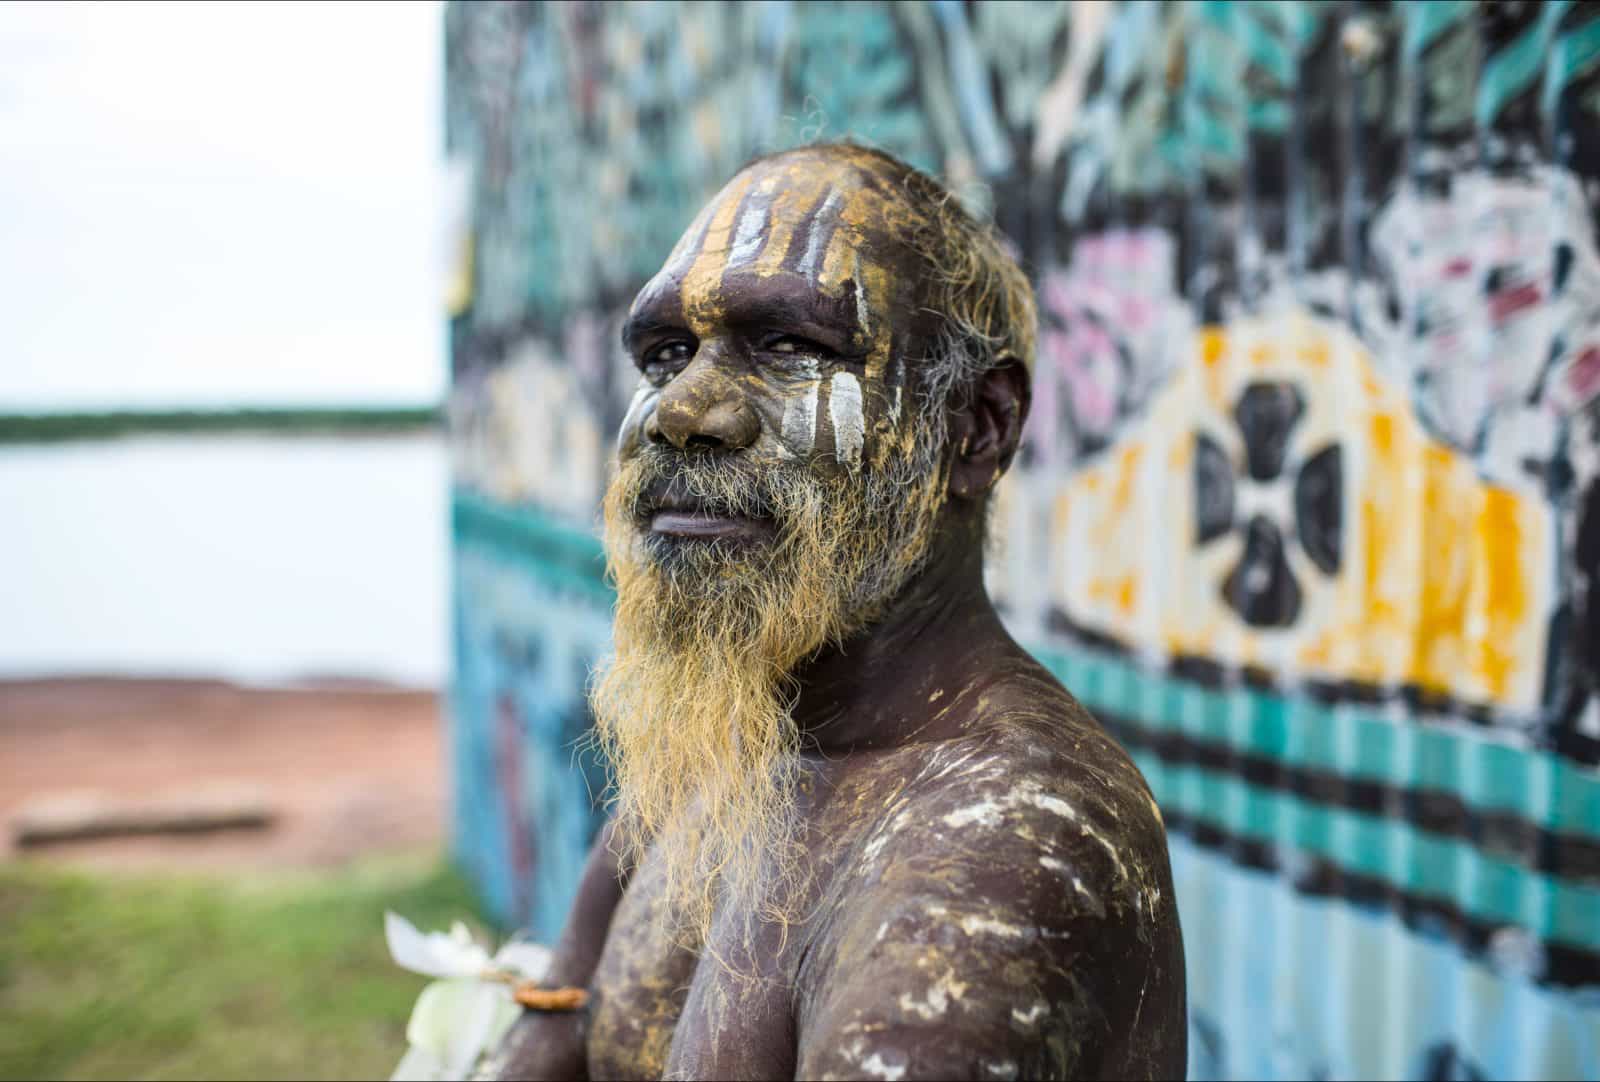 Local Tiwi Islands man in traditional body paint